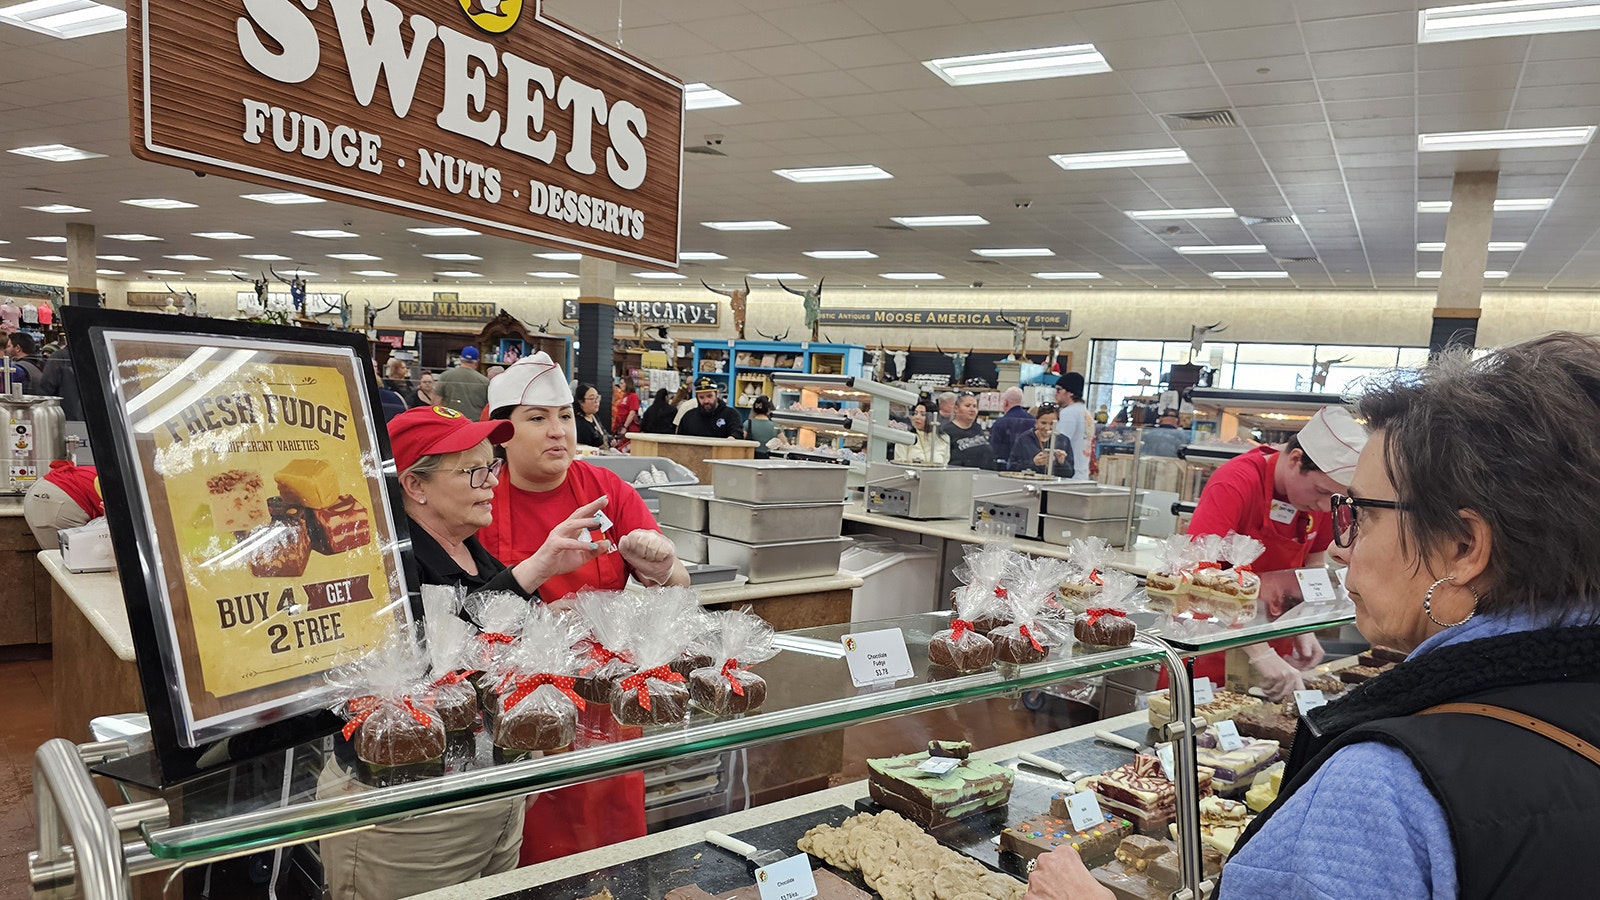 Fudge and other sweets are made fresh on site.